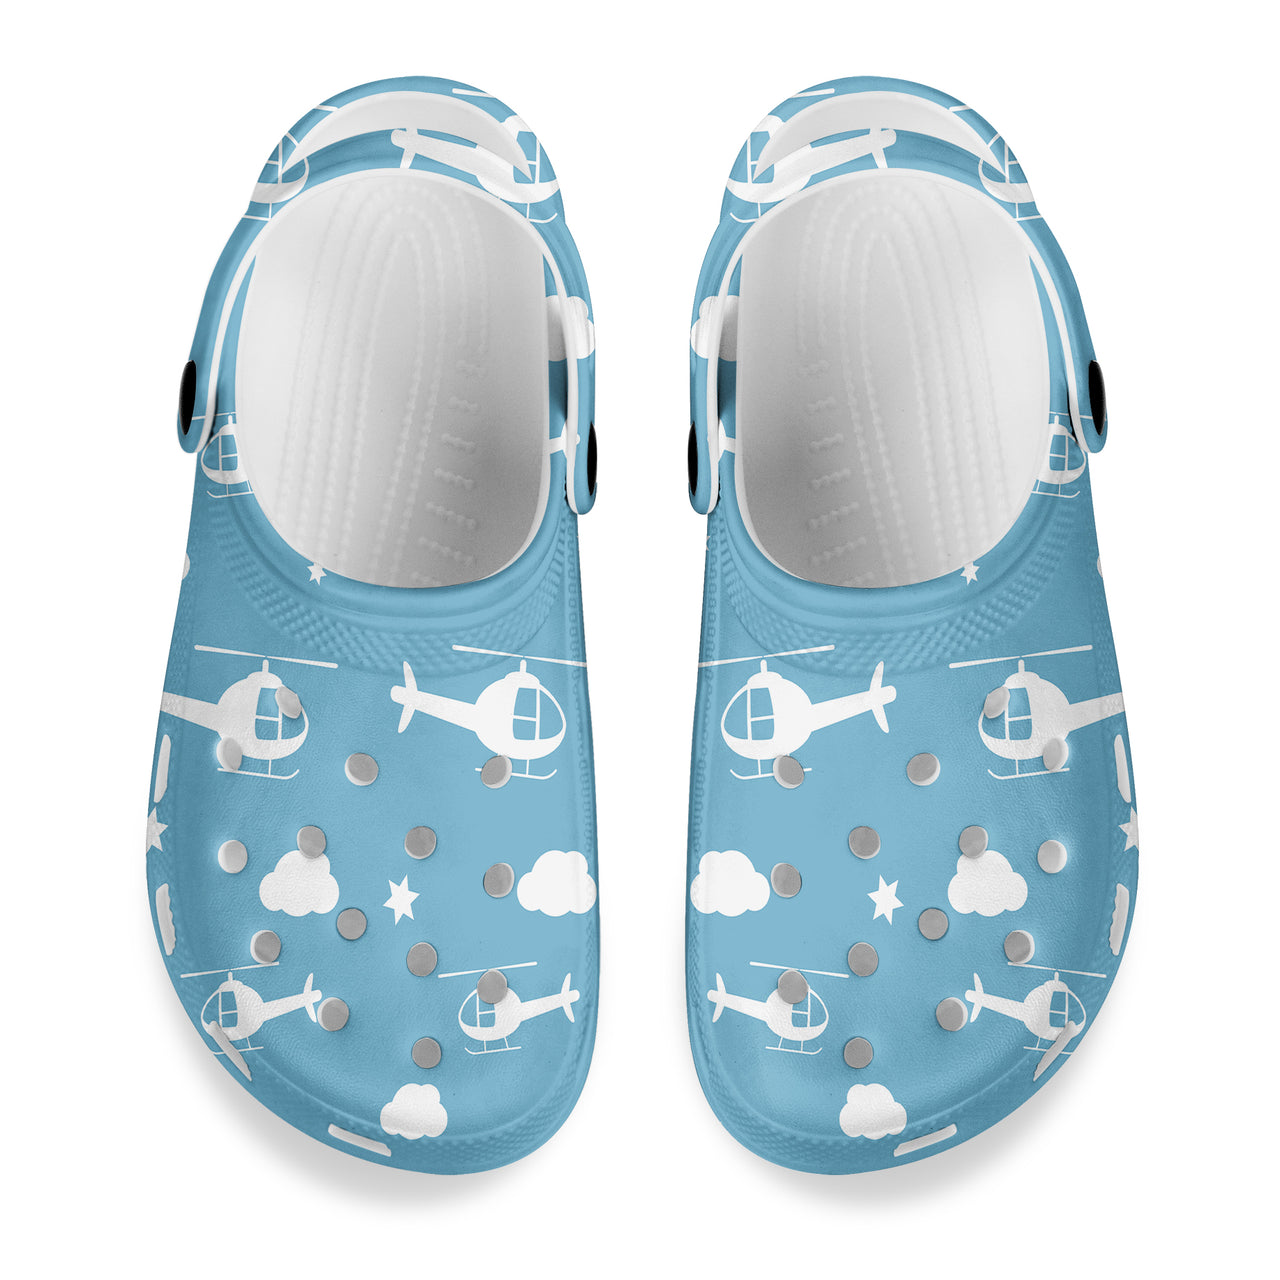 Helicopters & Clouds Designed Hole Shoes & Slippers (WOMEN)